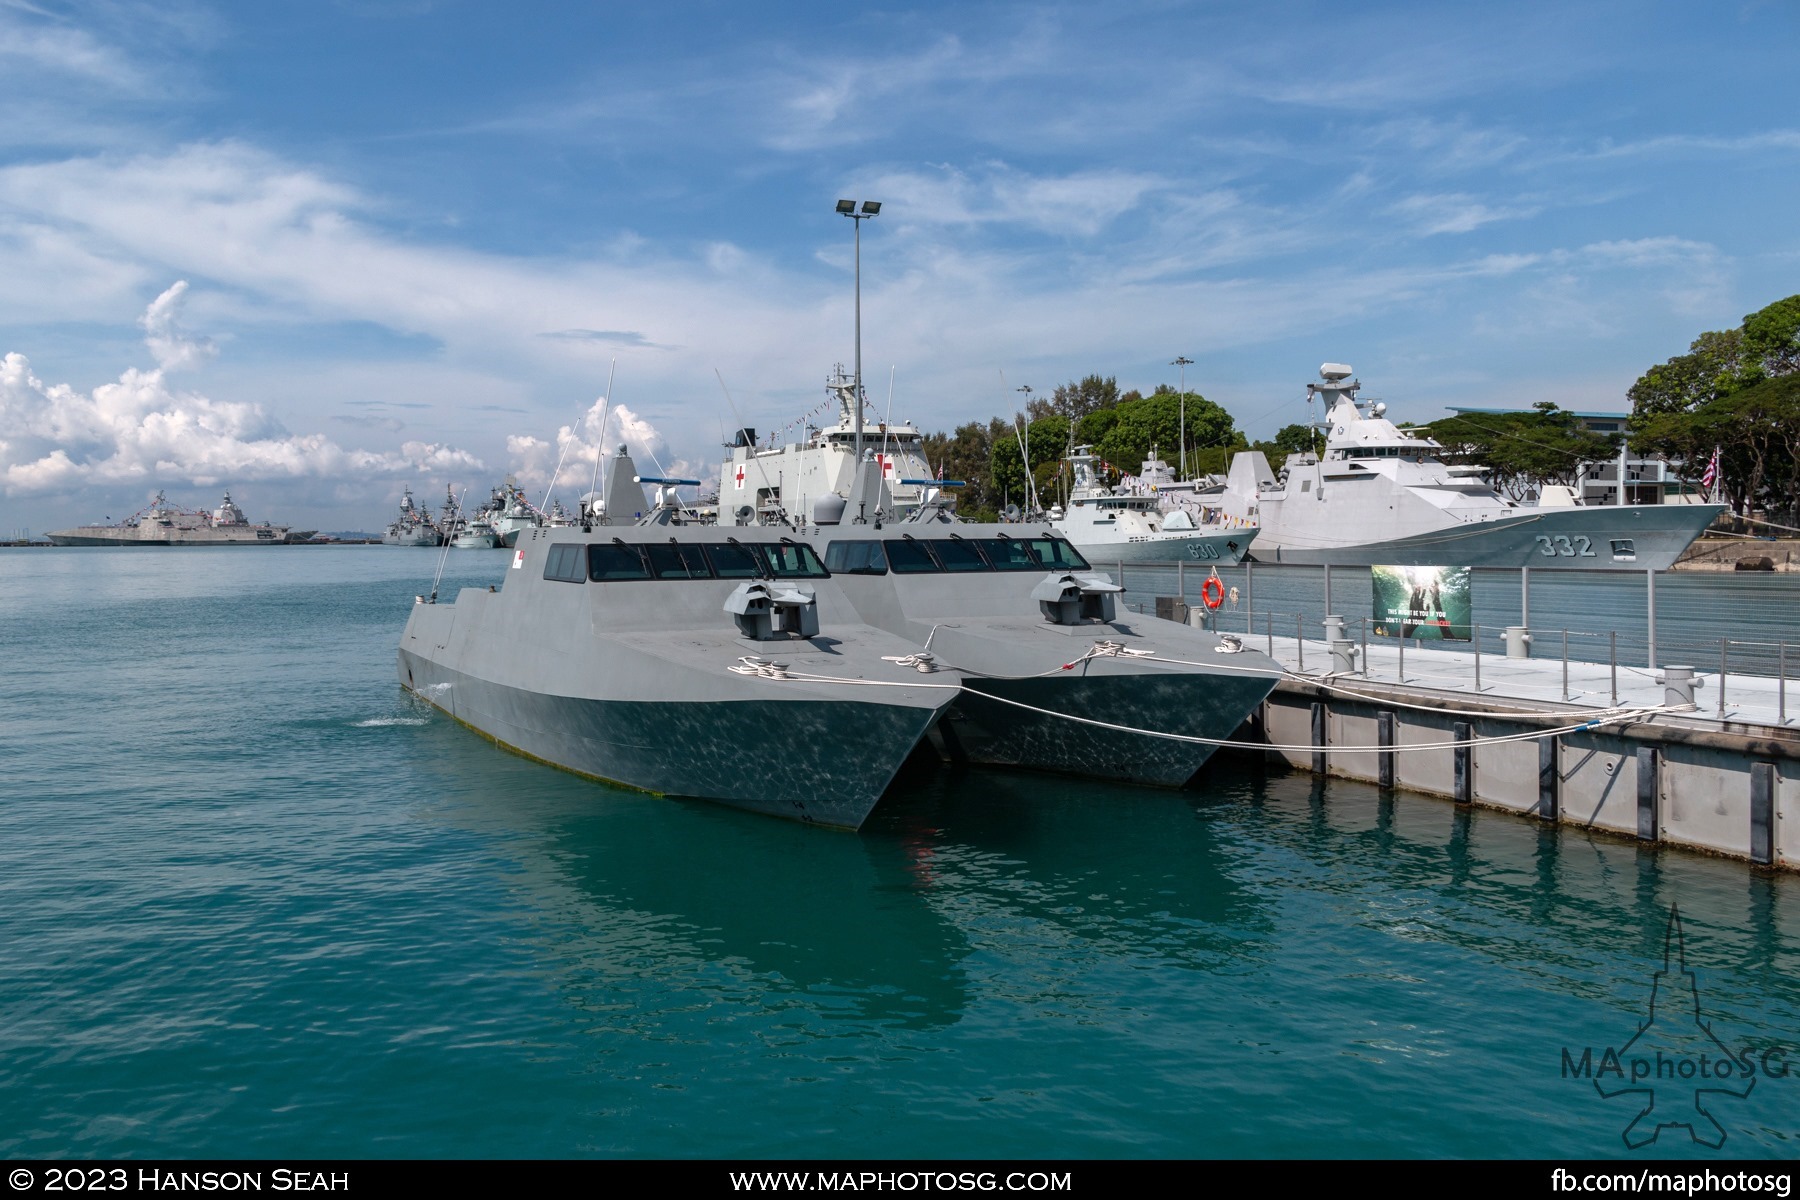 A pair of Republic of Singapore Navy Combatant Craft Large